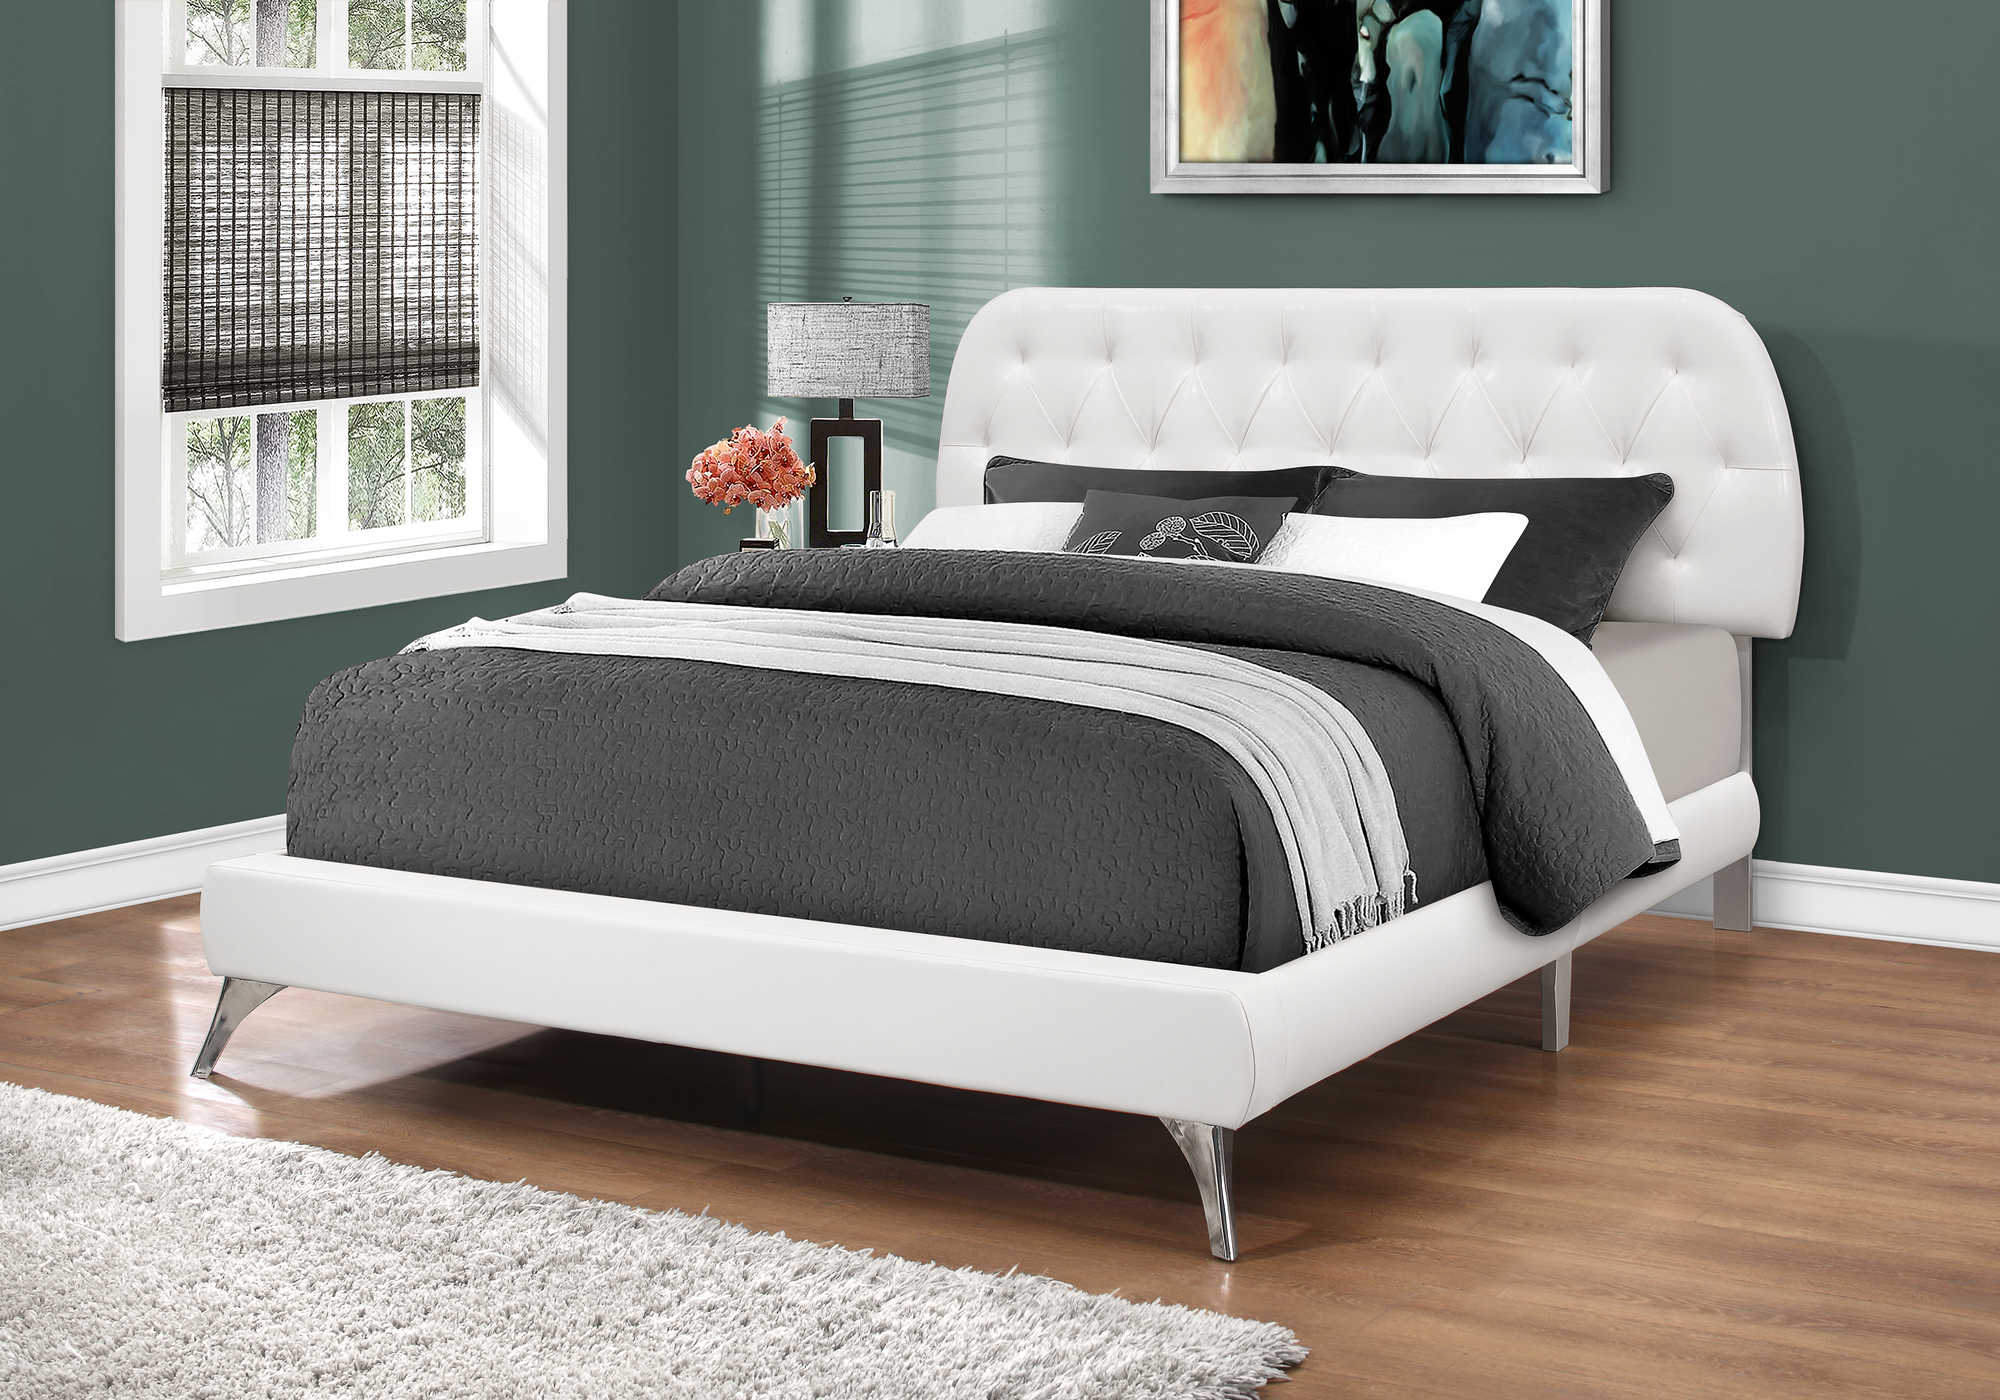 BED - QUEEN SIZE / WHITE LEATHER-LOOK WITH CHROME LEGS